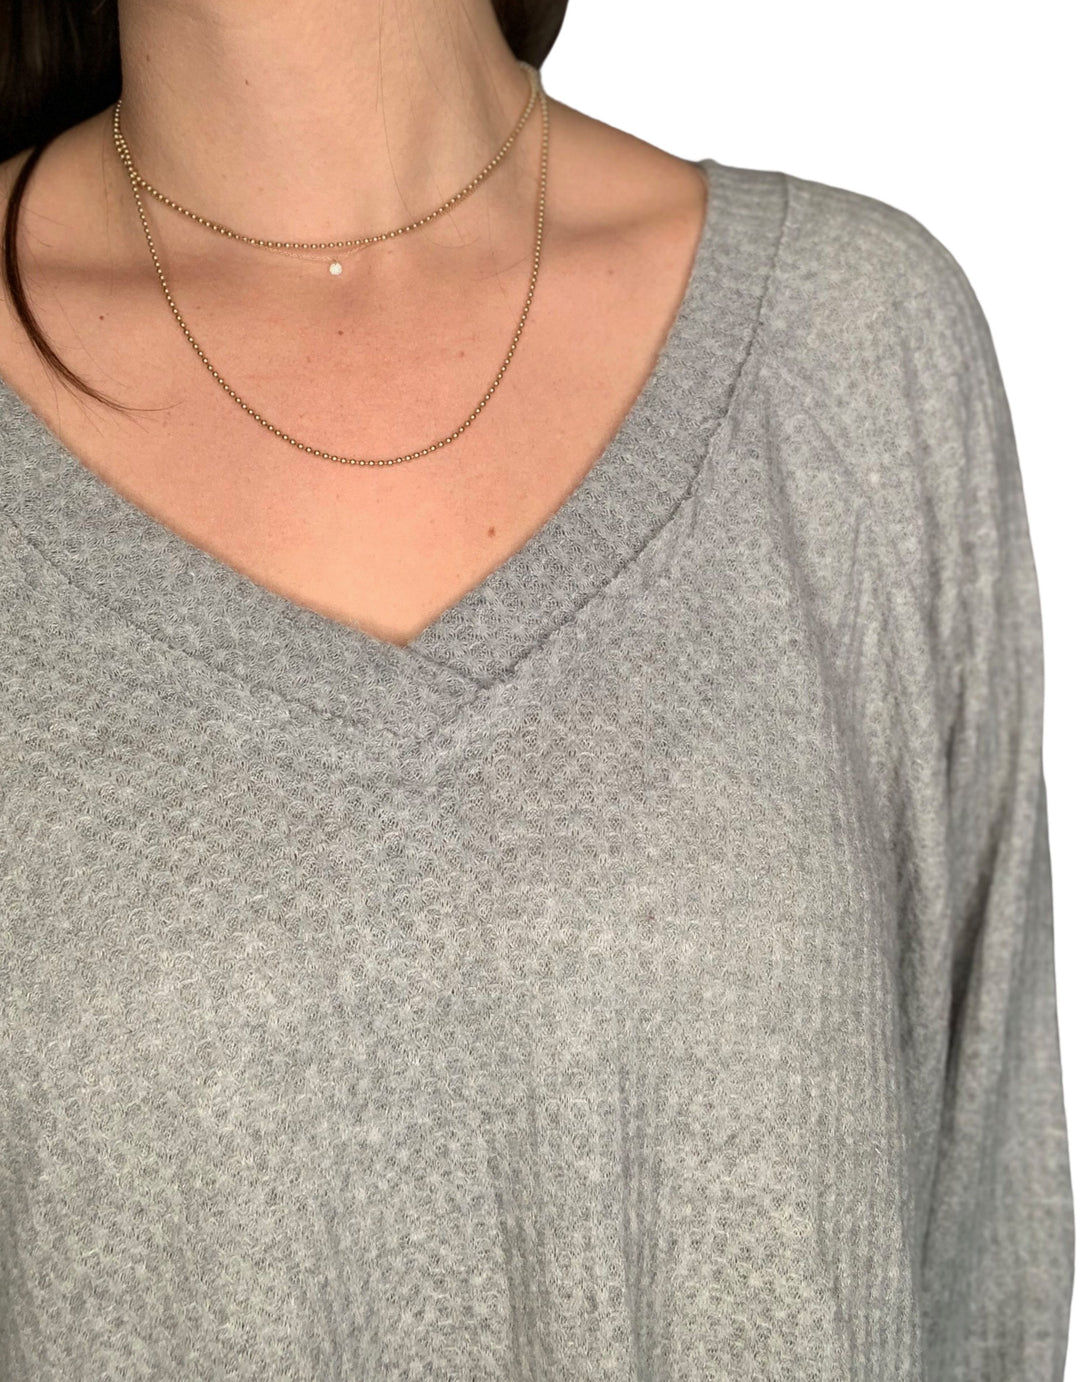 DREAM THERMAL COZY V-NECK - Kingfisher Road - Online Boutique